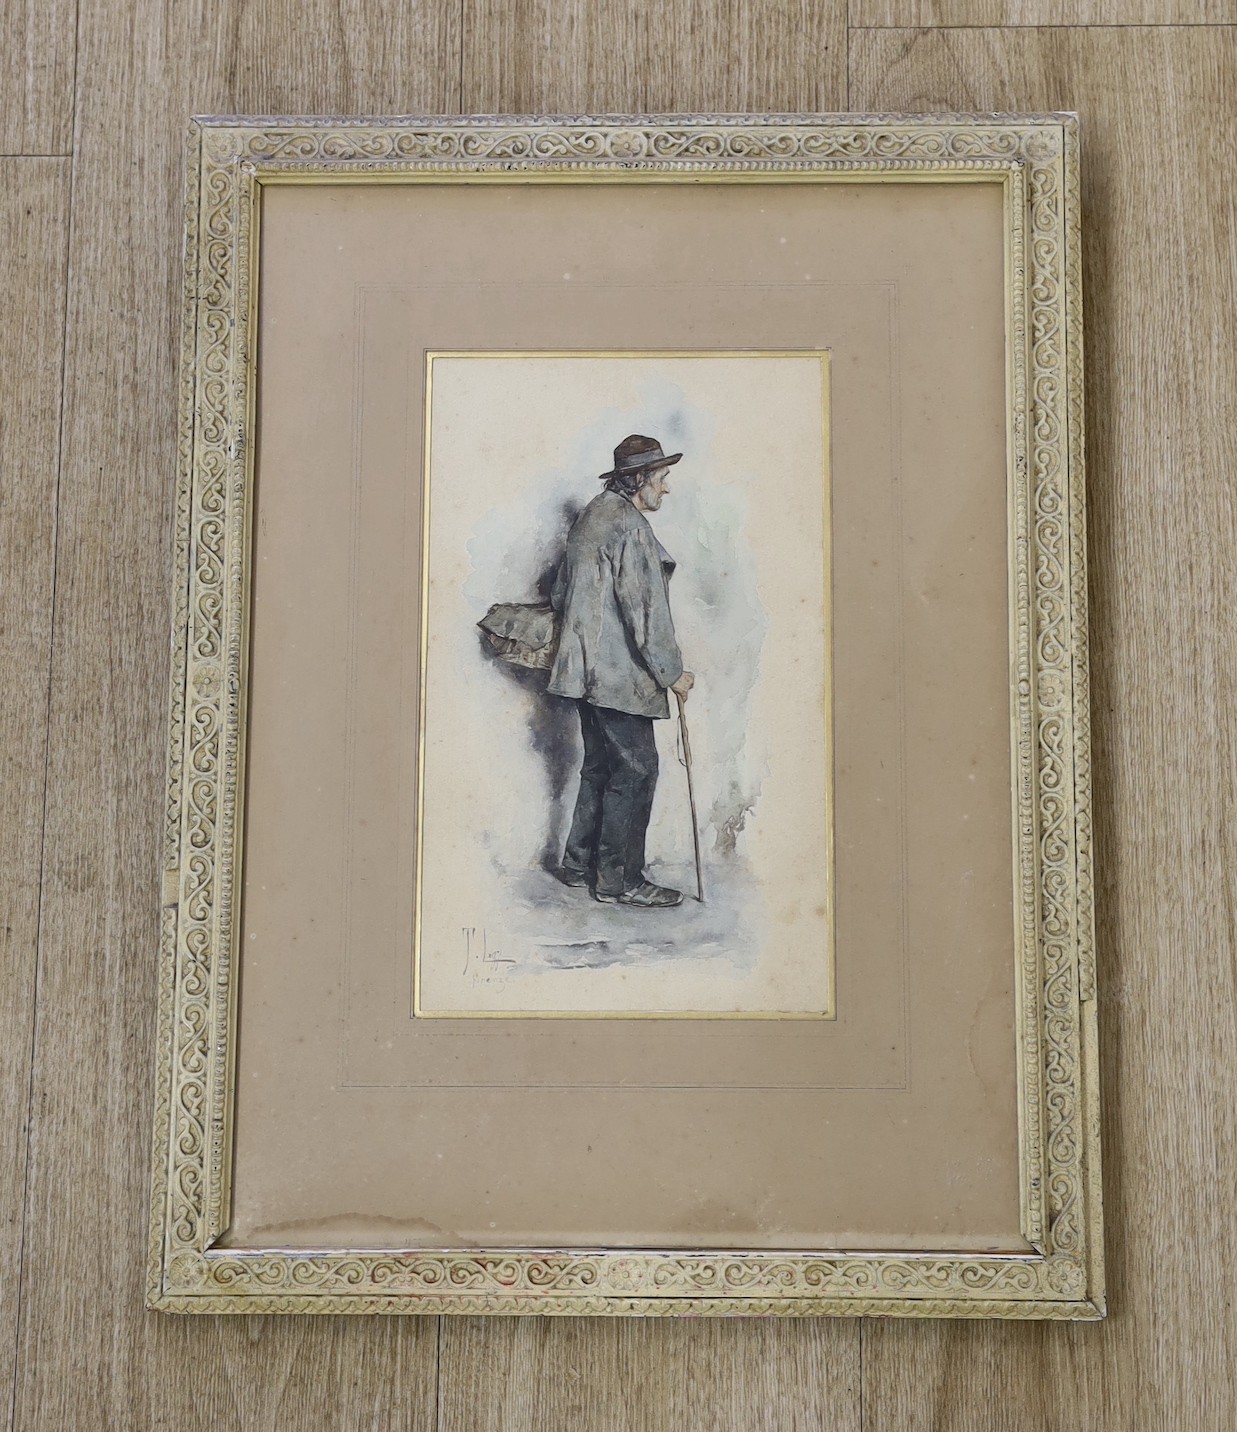 Tito Lessi (Italian, 1858-1917), watercolour, Study of a man holding a walking stick, signed and inscribed Ferenze, 29 x 17.5cm